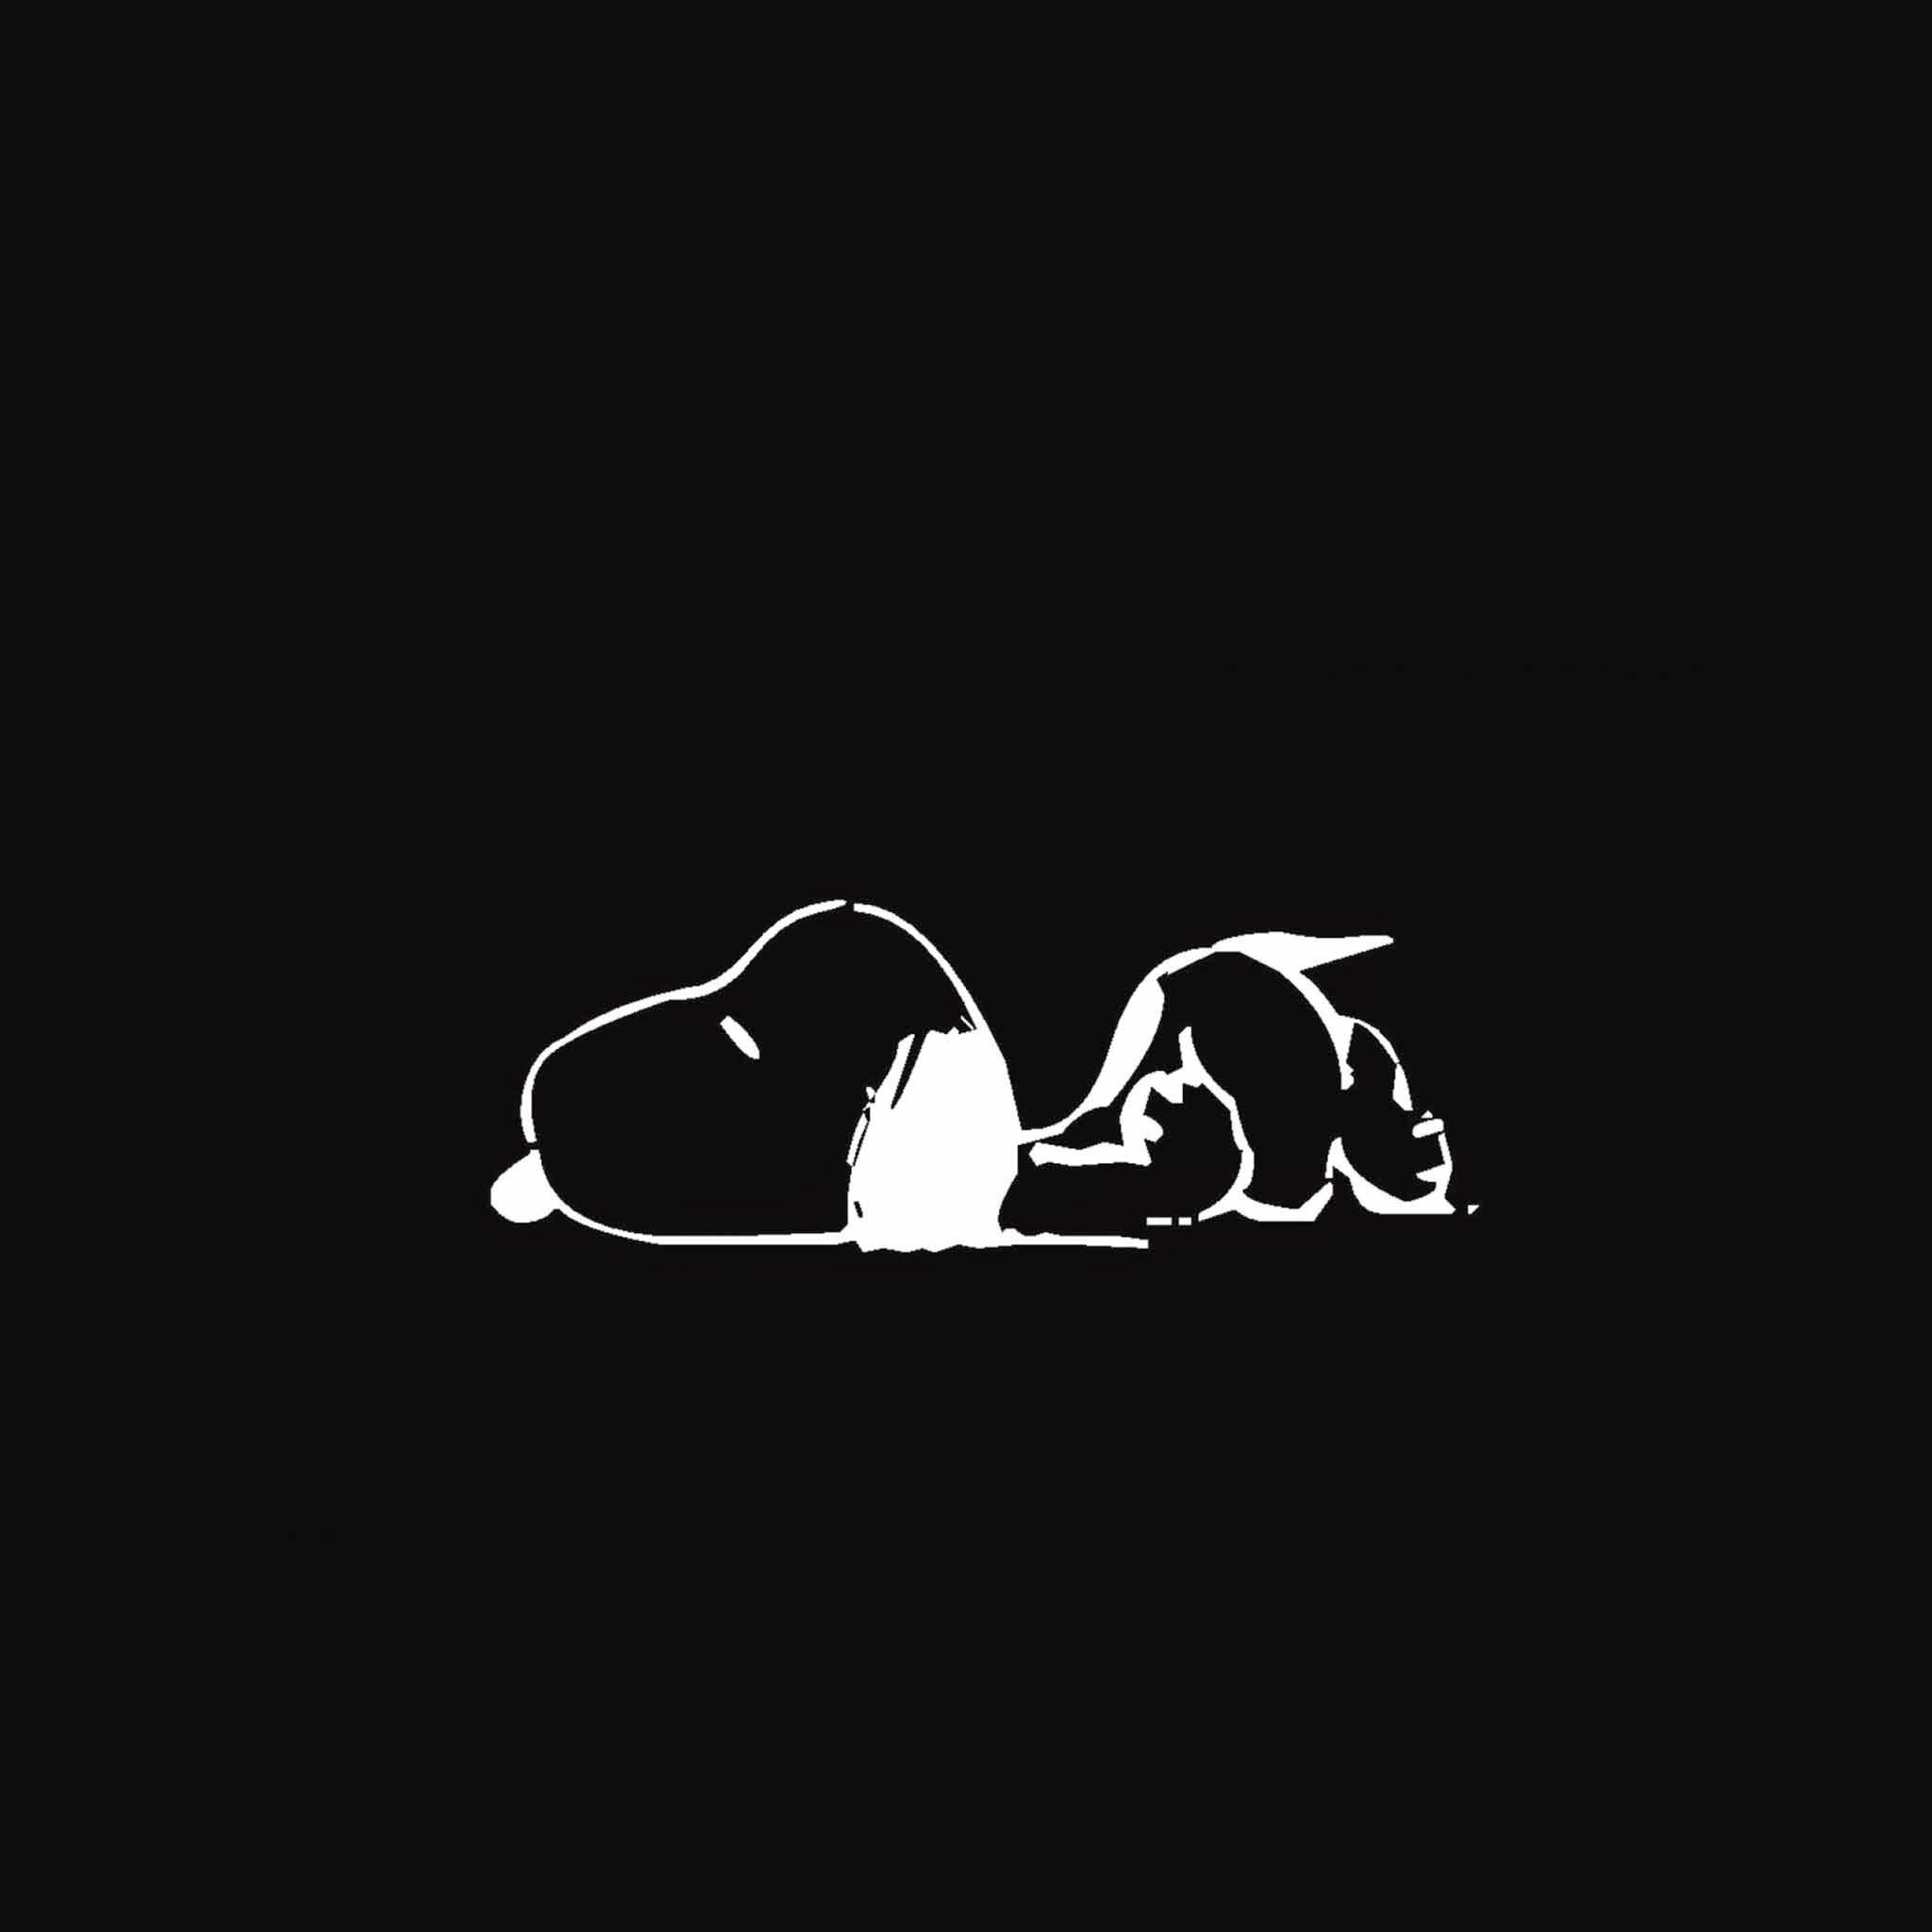 Miscellaneous. Snoopy wallpaper background, Snoopy wallpaper, Black and white cartoon